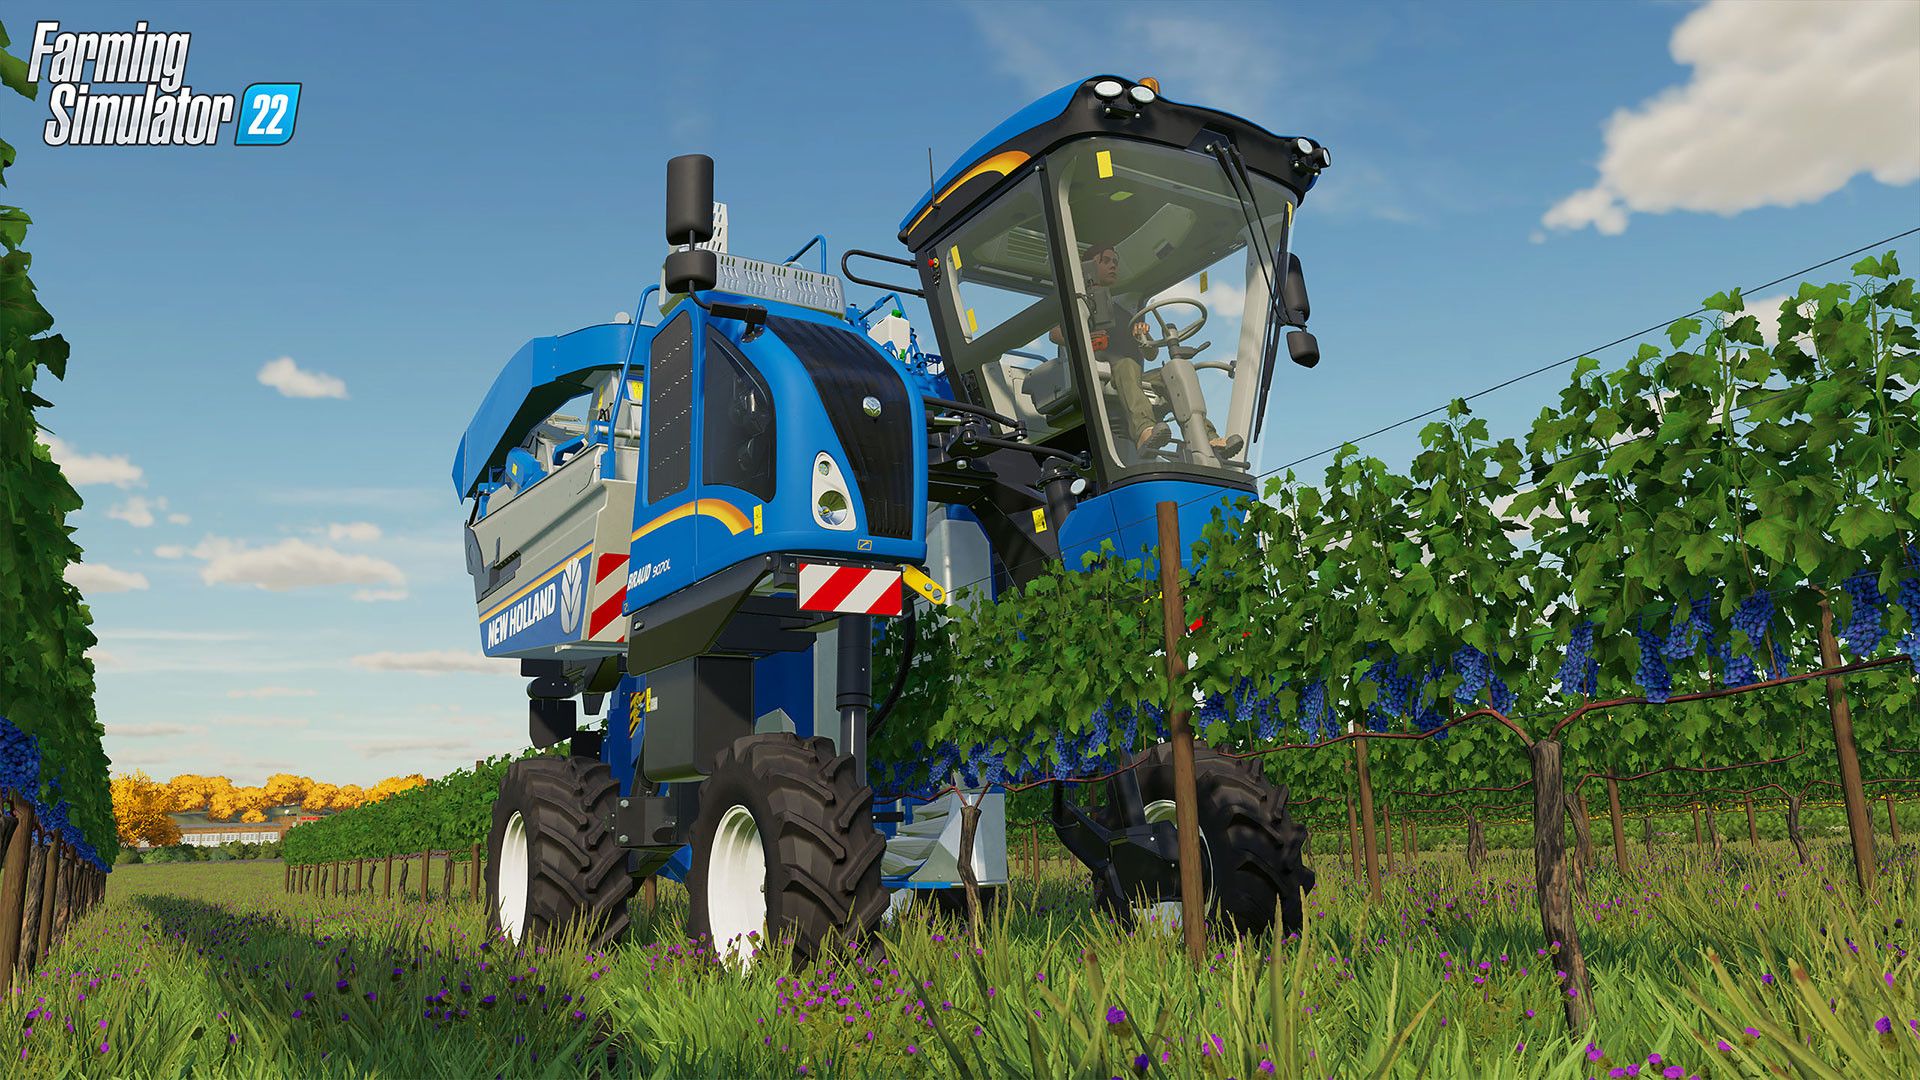 Farming Simulator 22 - Premium Edition | Download and Buy Today - Epic  Games Store